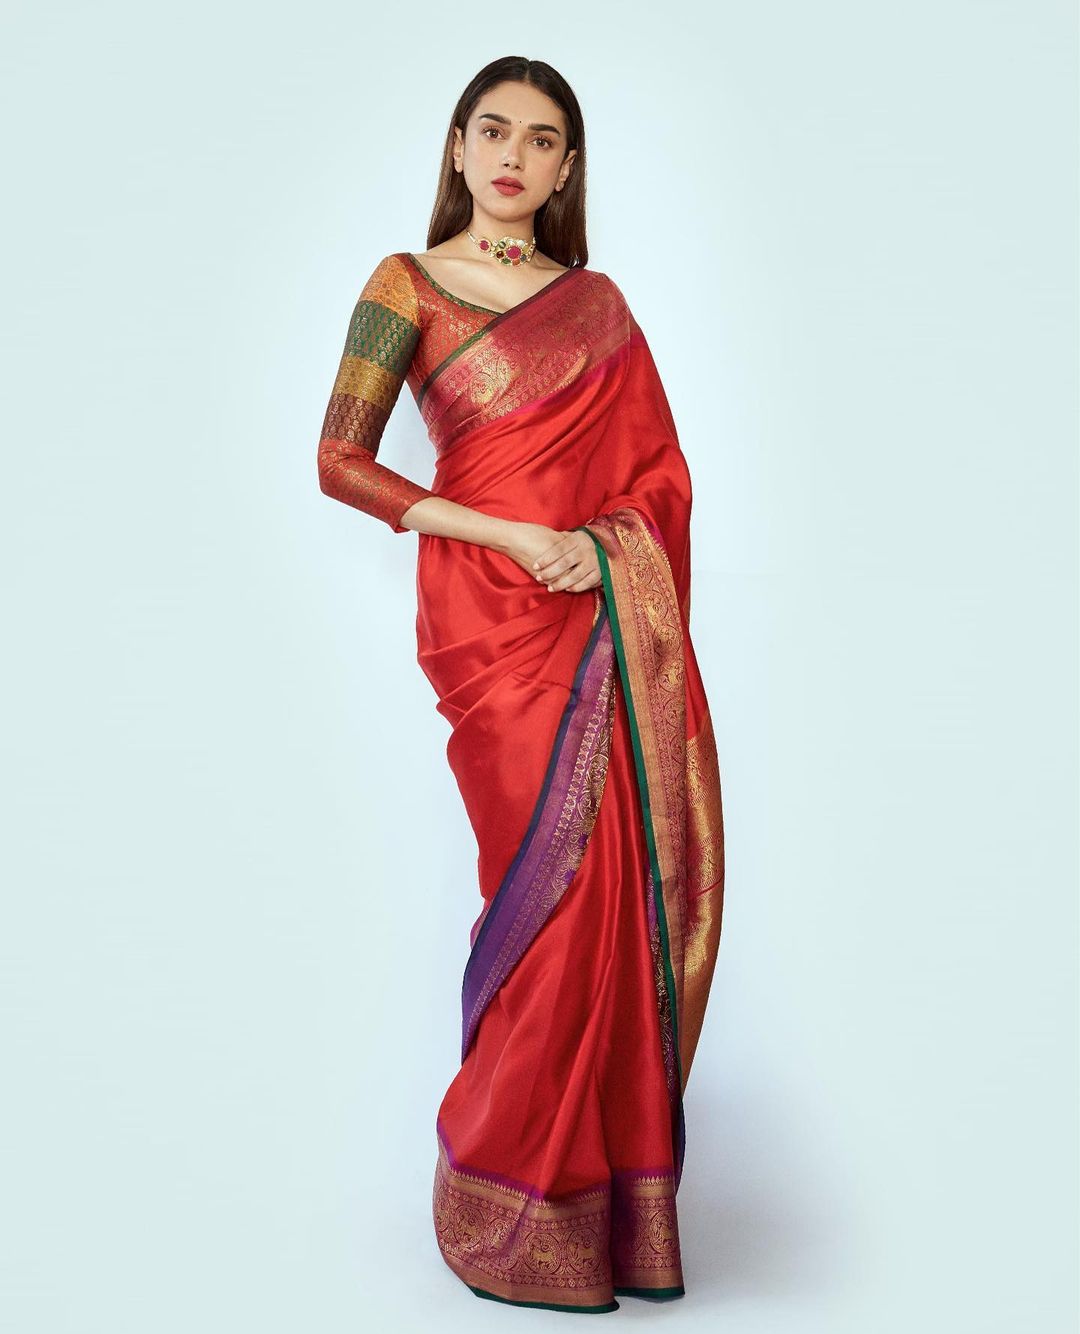 Aditi Rao Hydari Exudes Elegance In Red Silk Saree, Check Out The Diva's  Most Stunning Saree Moments